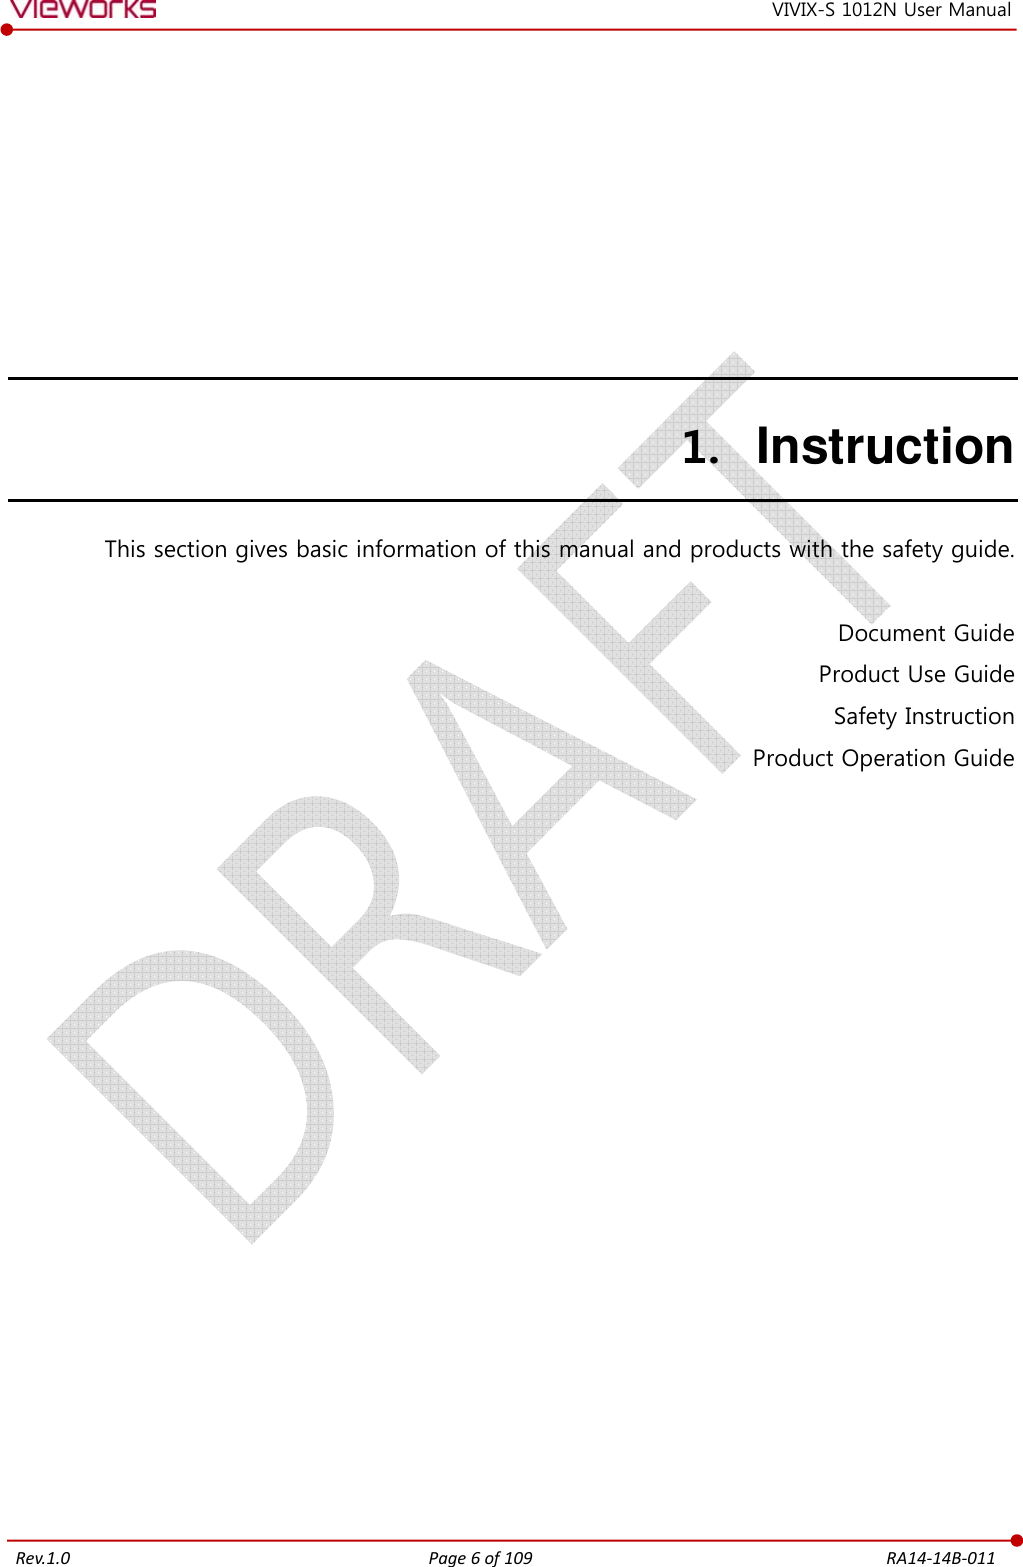   Rev.1.0 Page 6 of 109  RA14-14B-011 VIVIX-S 1012N User Manual 1. Instruction This section gives basic information of this manual and products with the safety guide.  Document Guide Product Use Guide Safety Instruction Product Operation Guide  